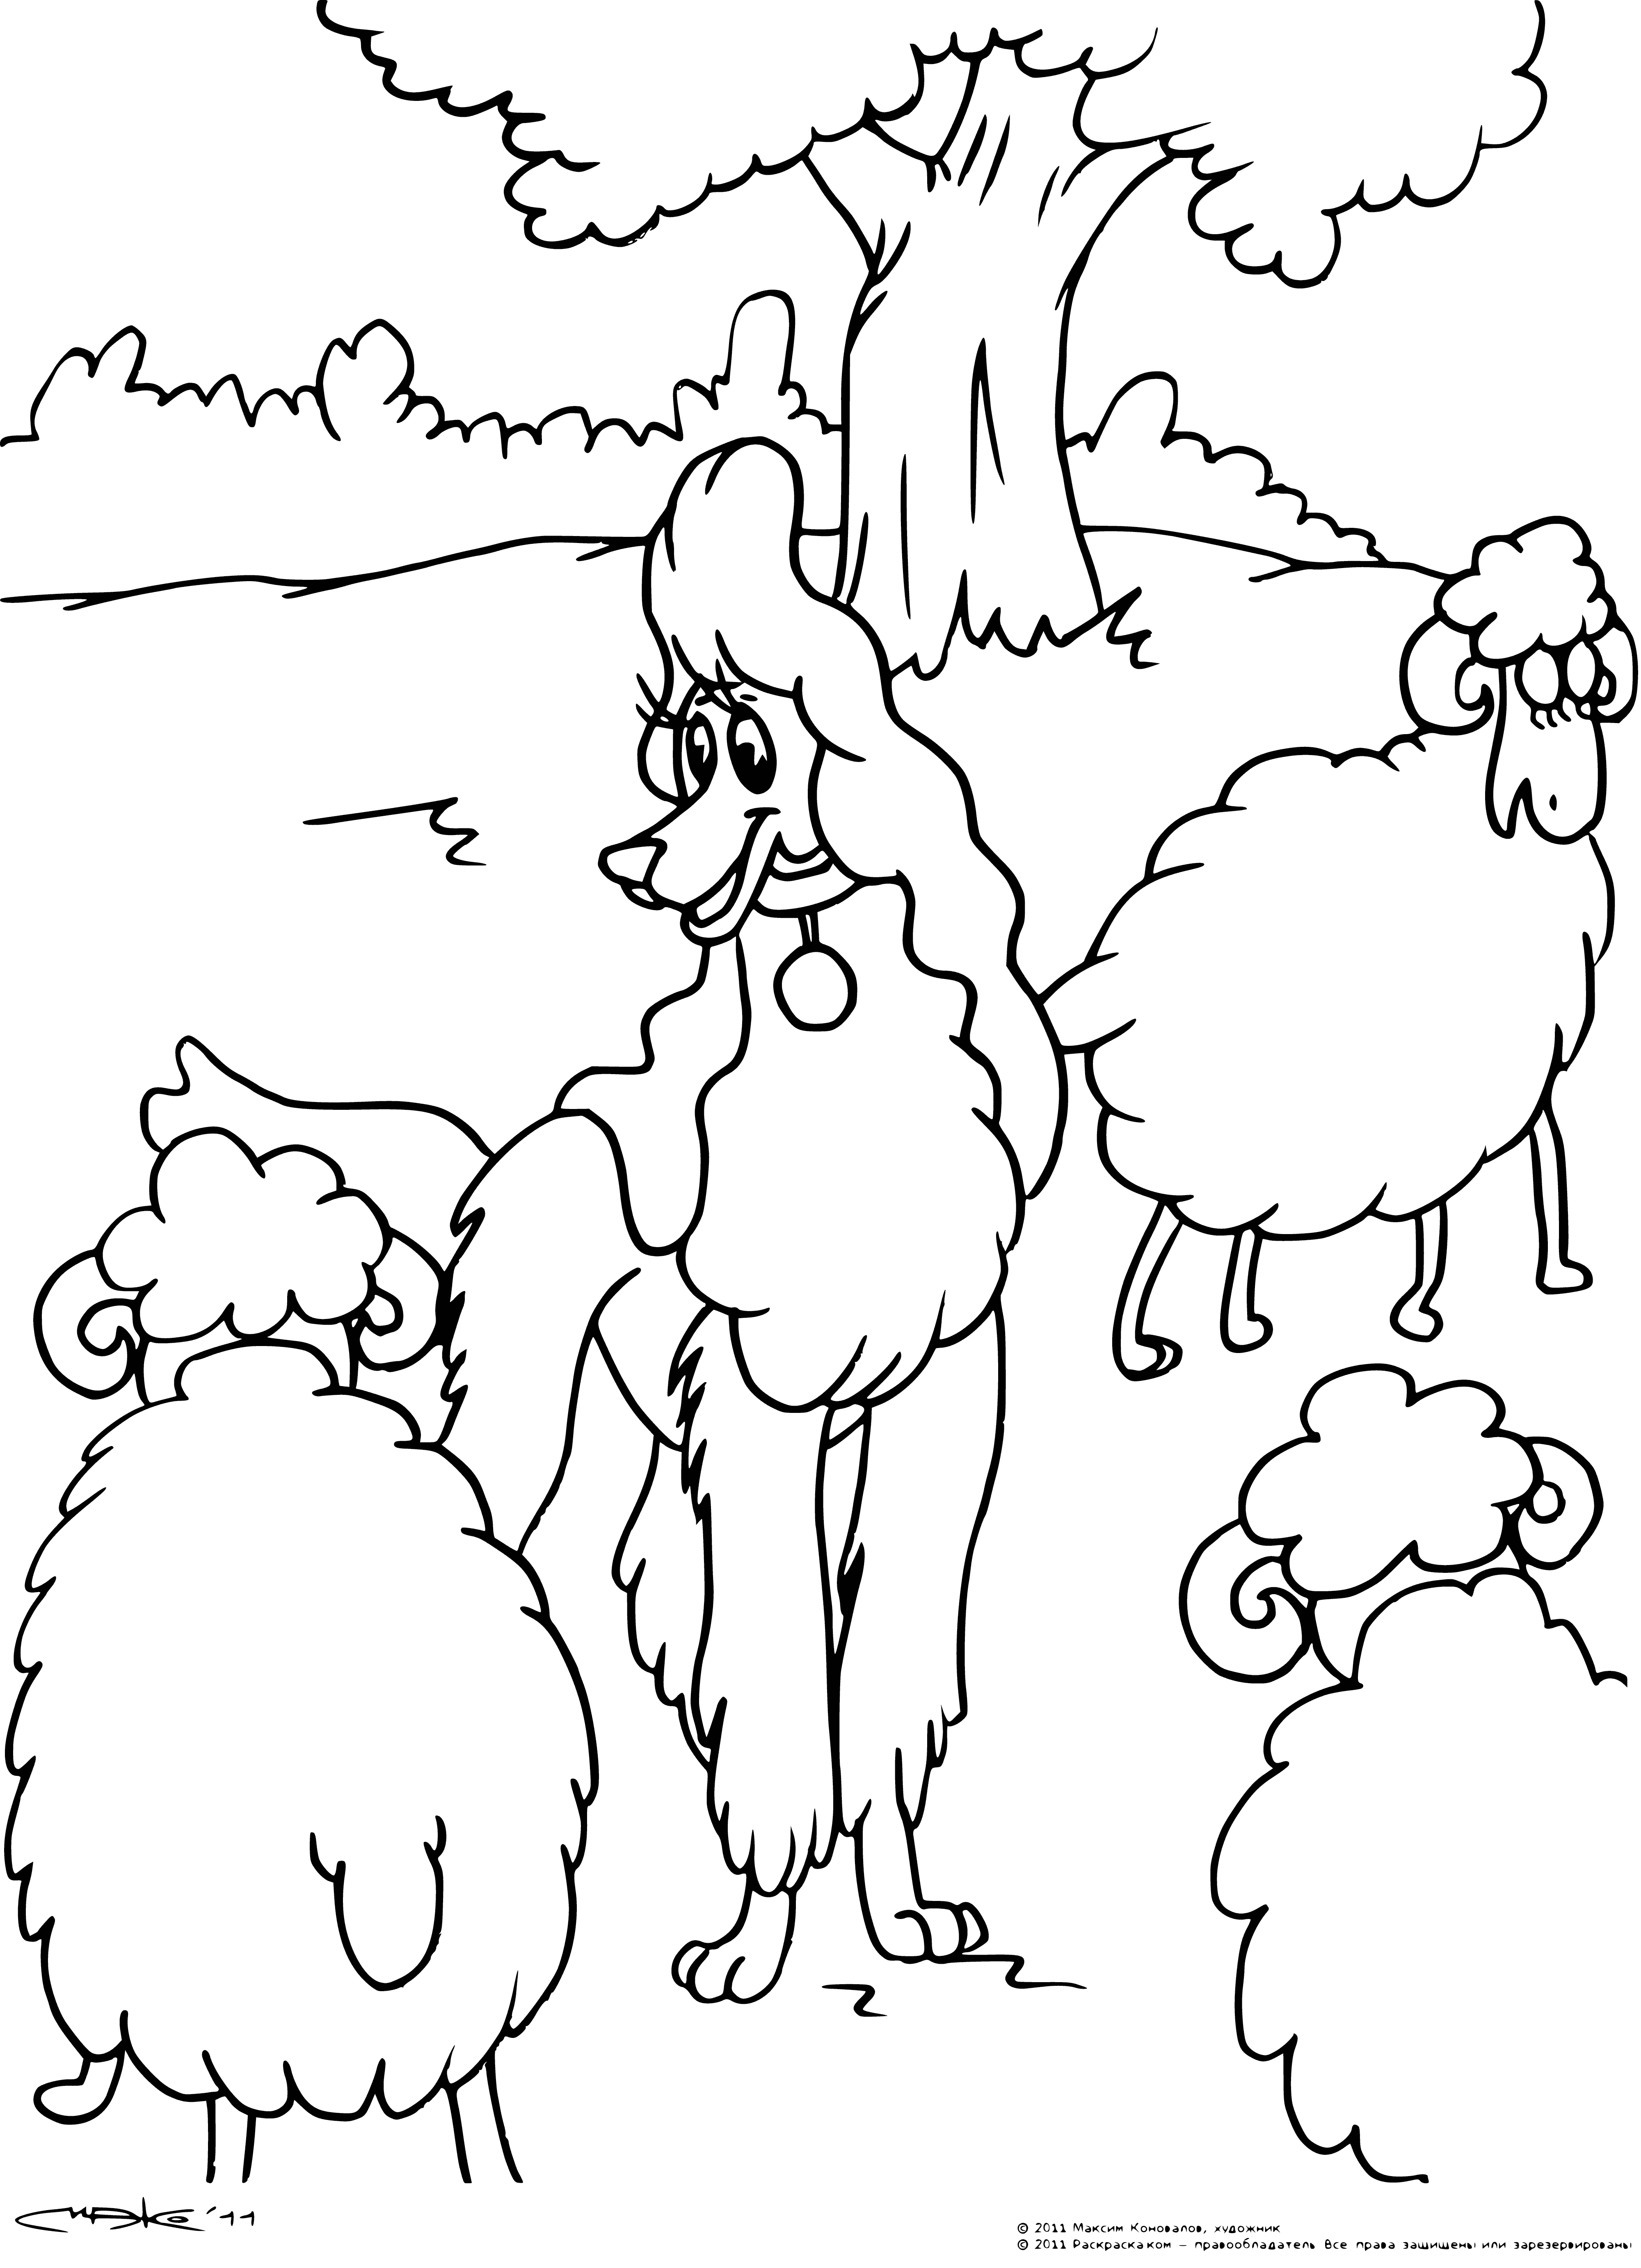 coloring page: Dog in boots stands sadly in sheep-filled field, watching the flock.